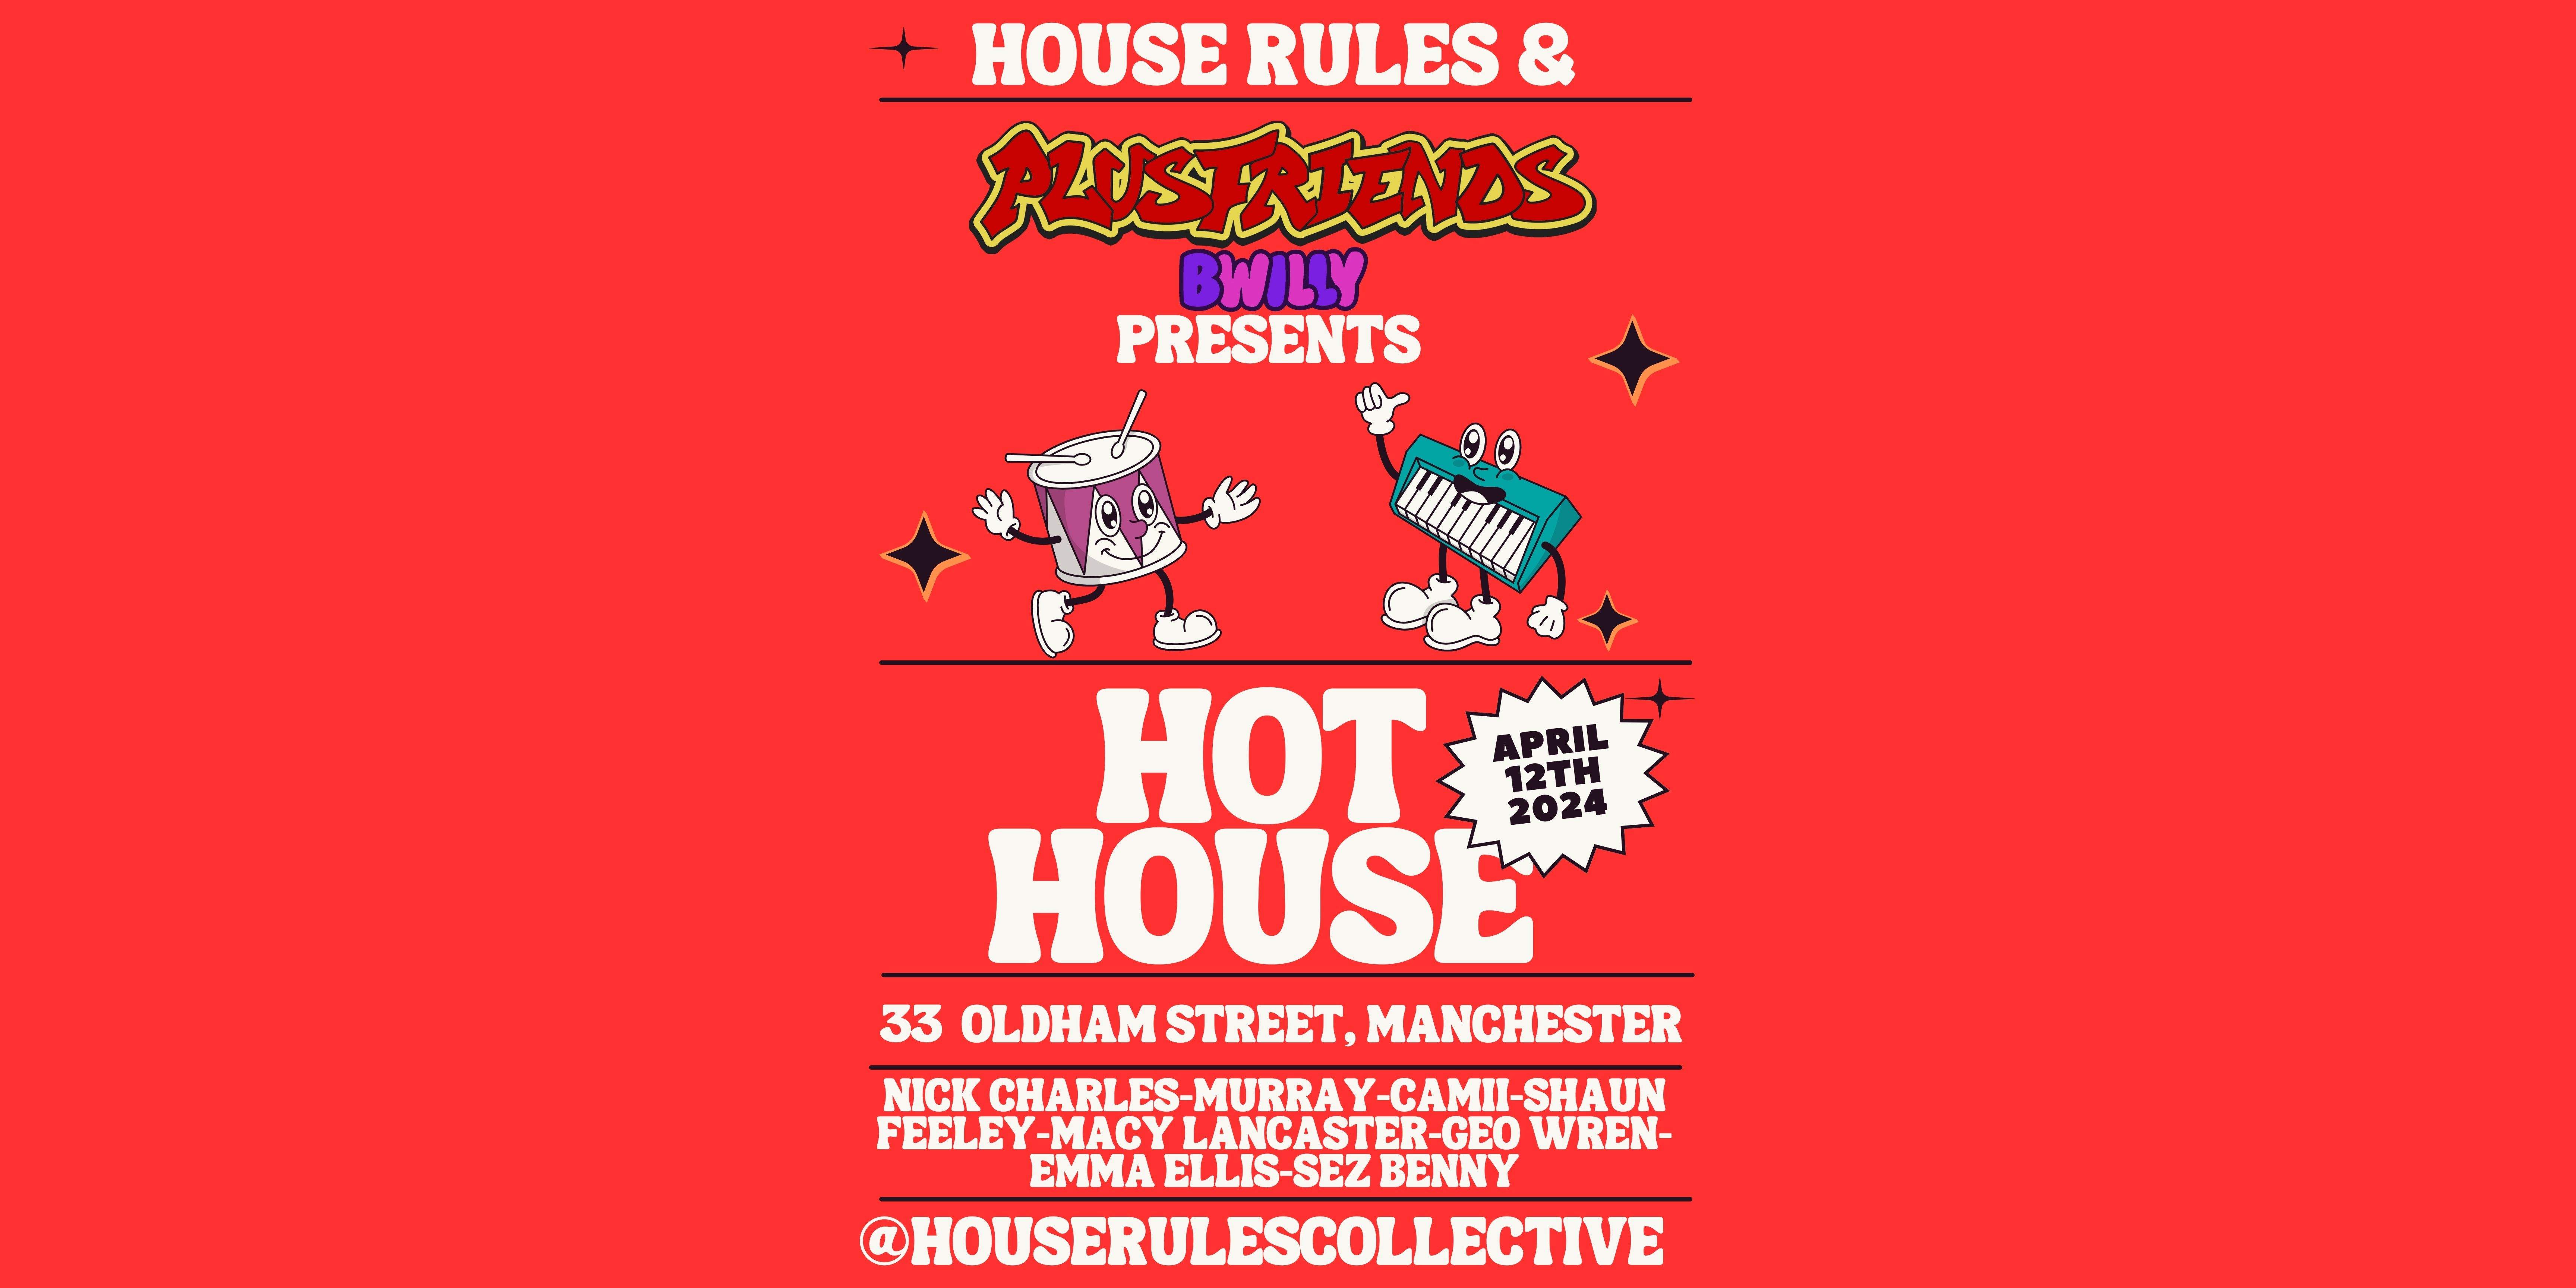 House Rules x PLUSFRIENDS PRESENTS: HOT HOUSE - Página frontal